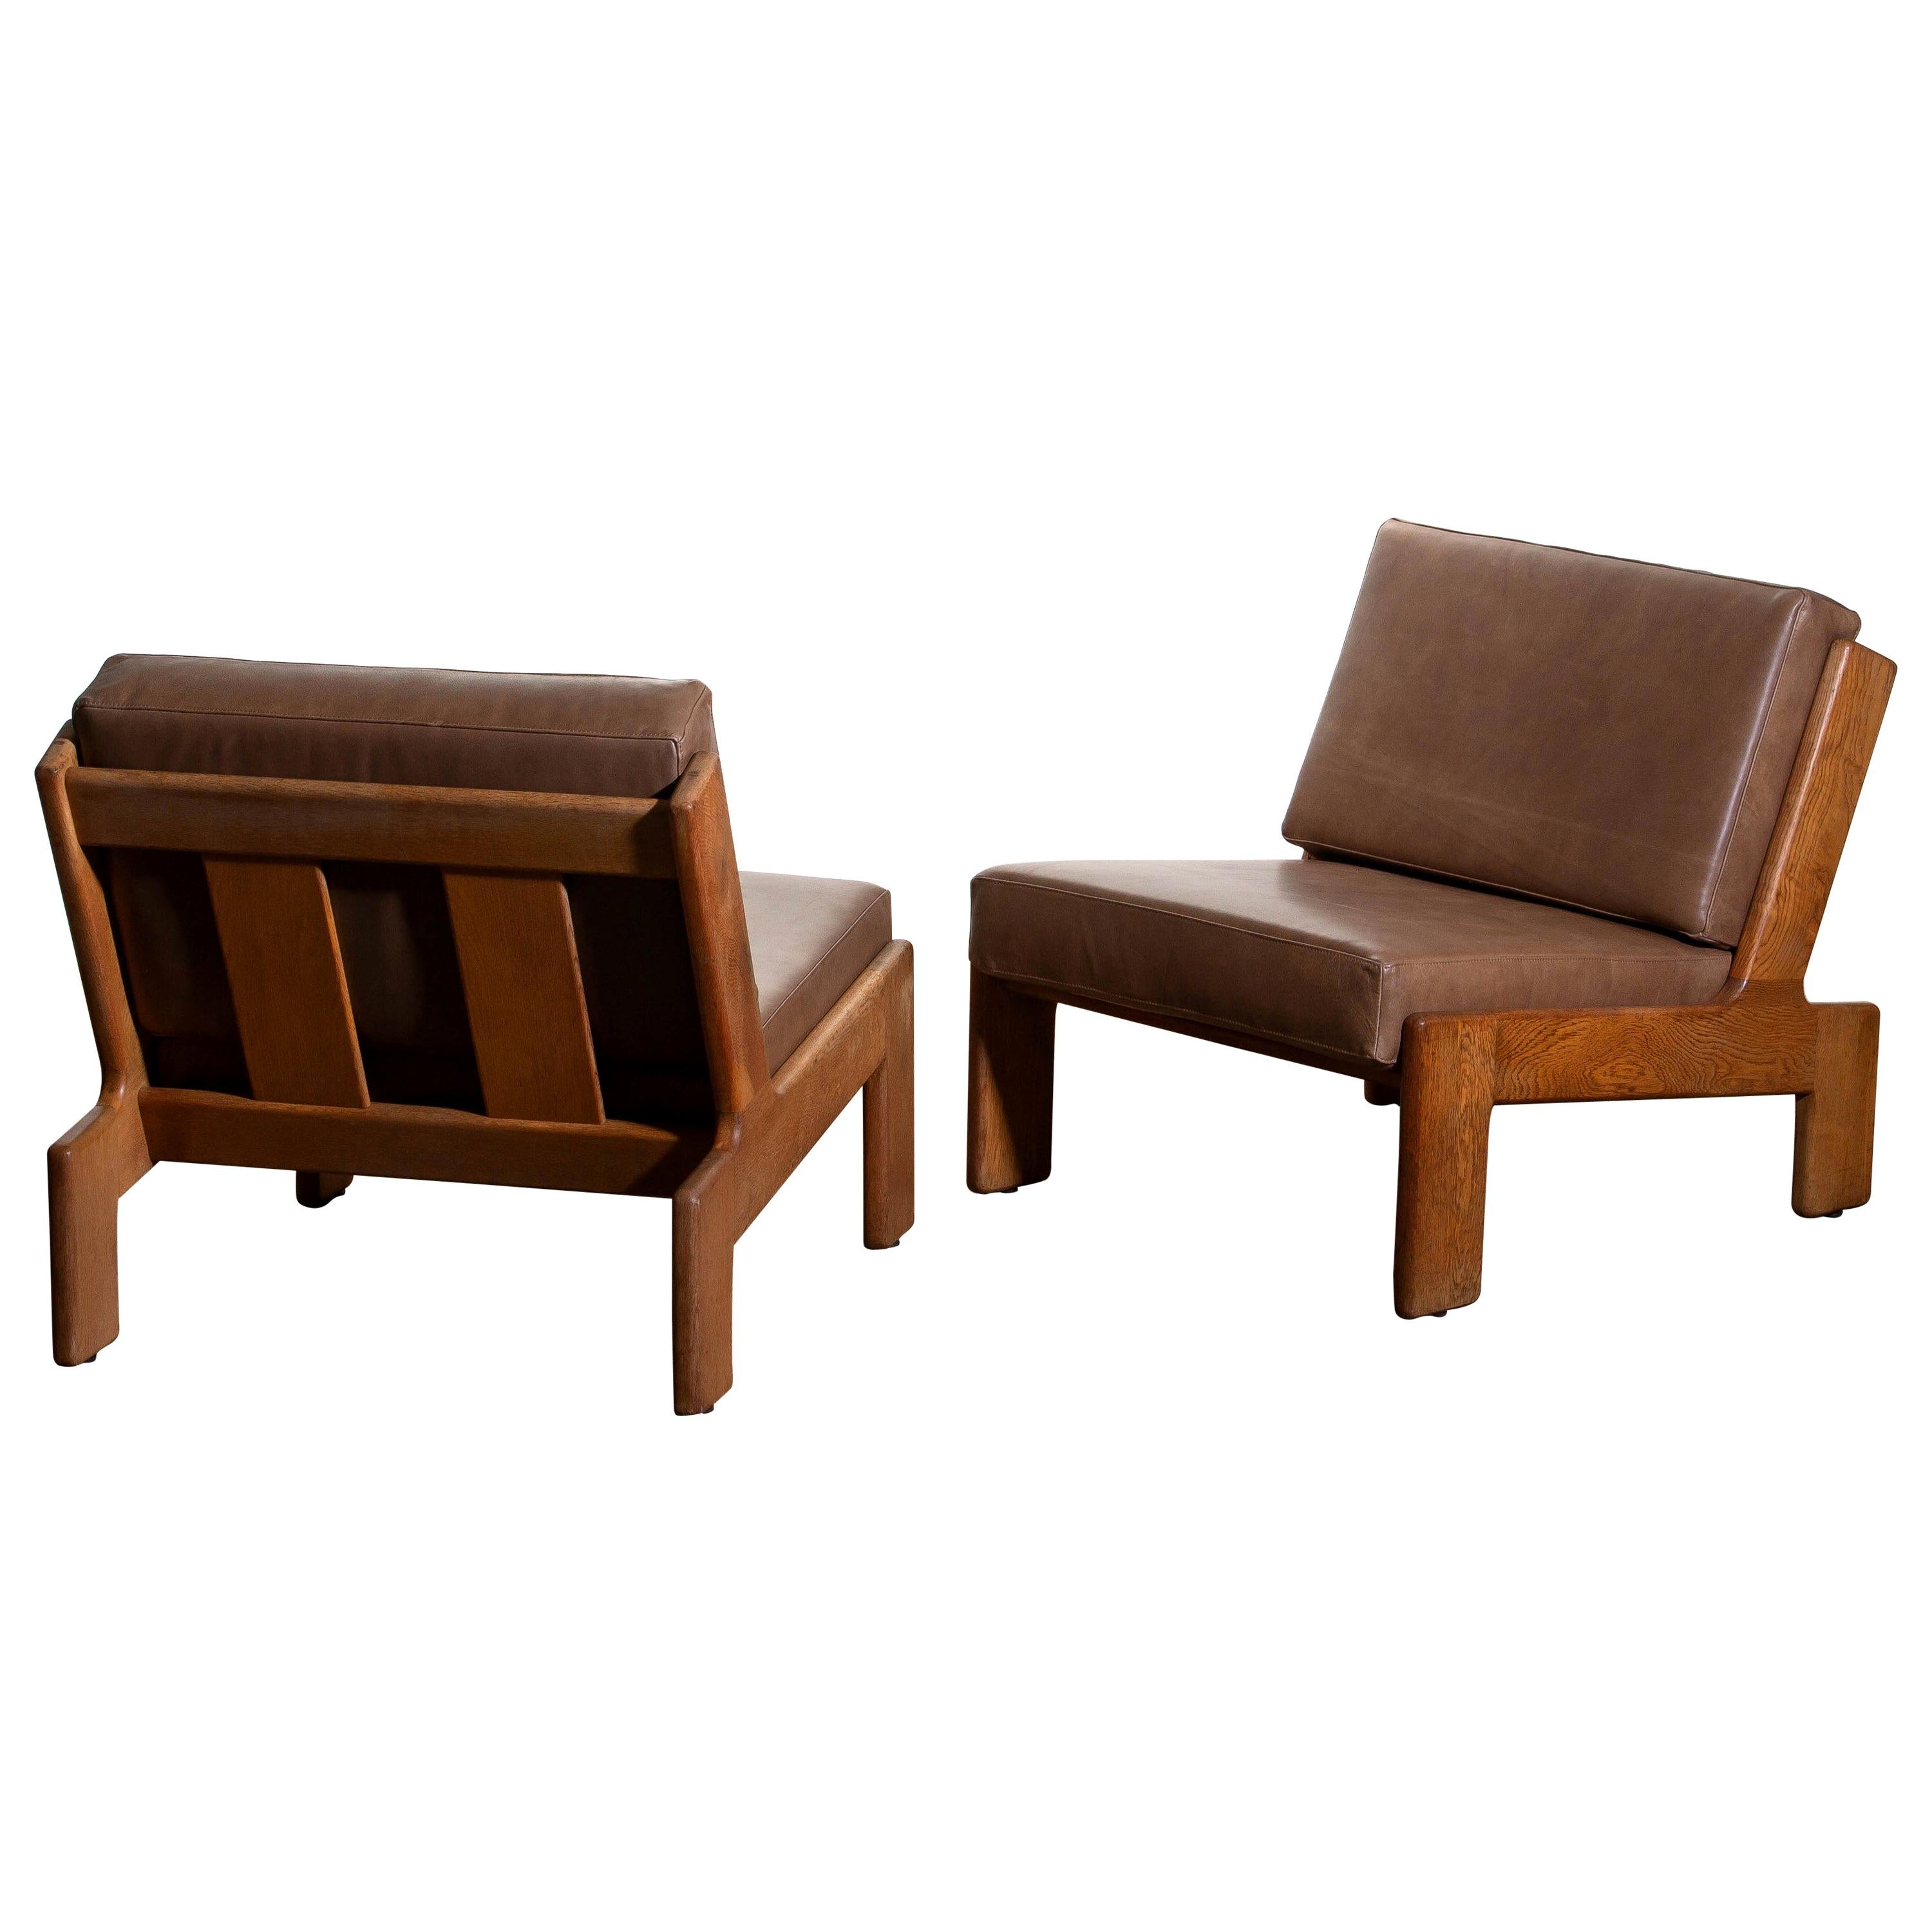 Mid-Century Modern 1960, Pair of Oak and Leather Cubist Lounge Chairs by Esko Pajamies for Asko